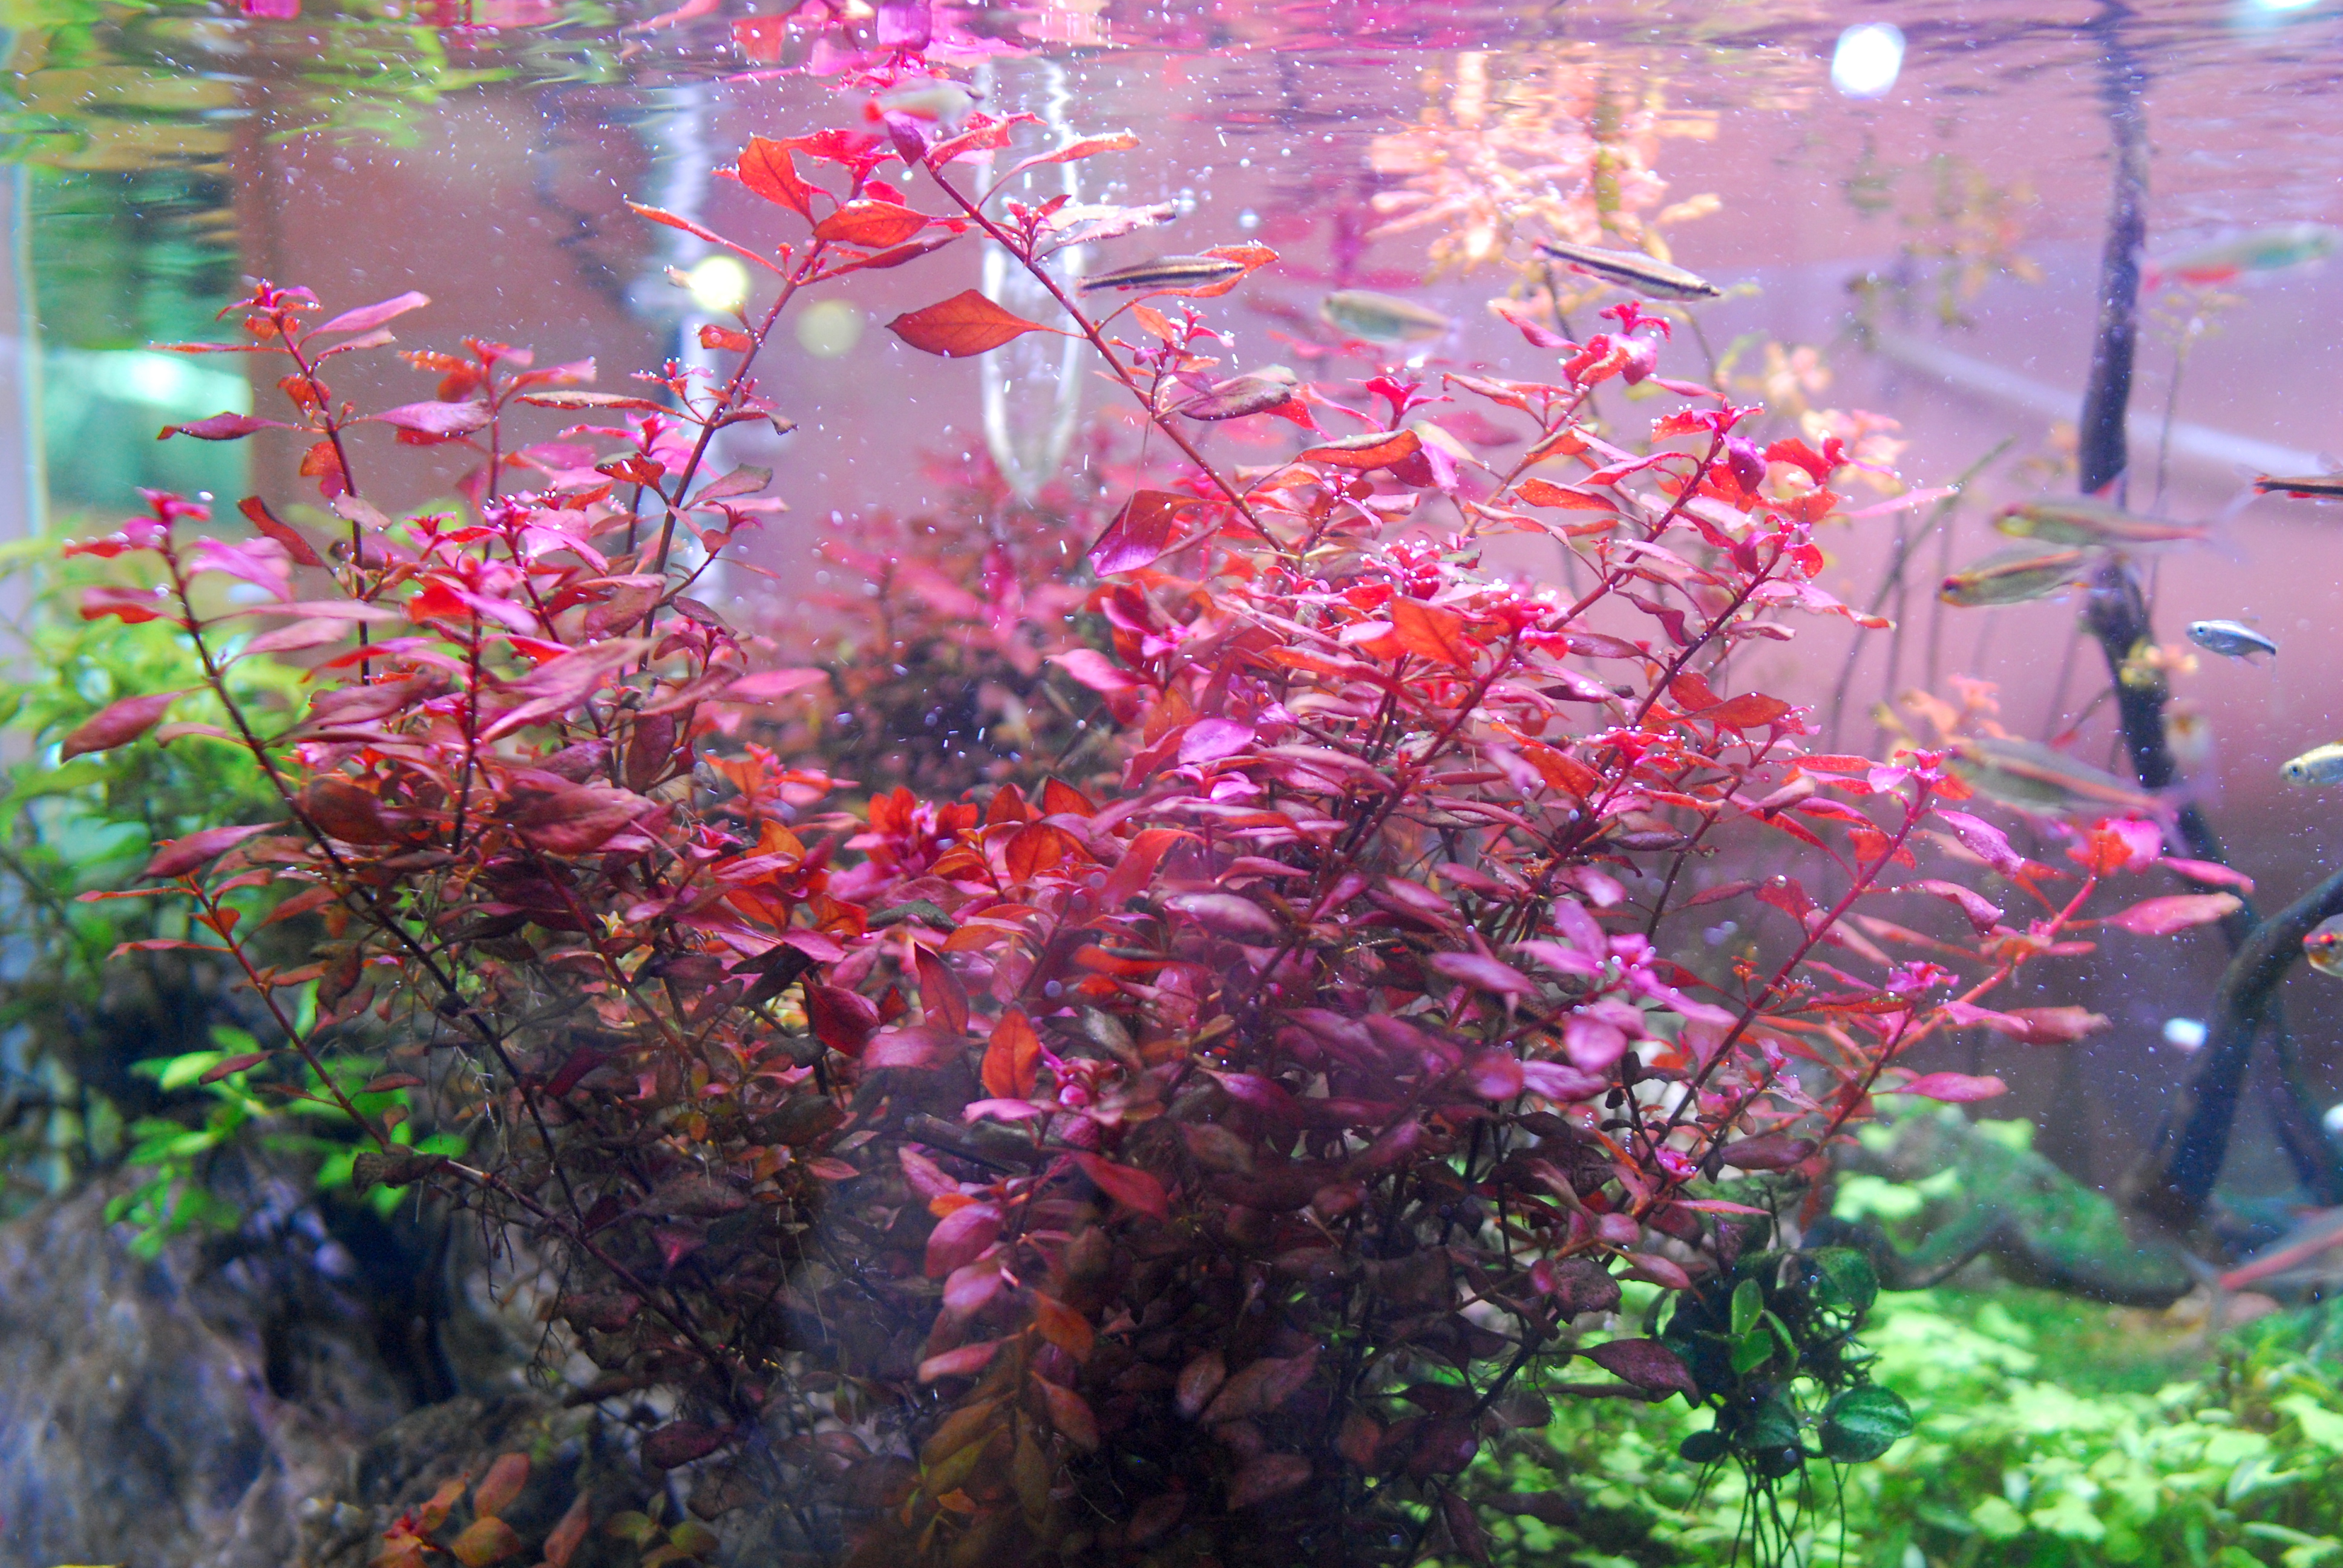 Super Red Natans Ludwigia in our UNS 120U Rimless Planted Tank